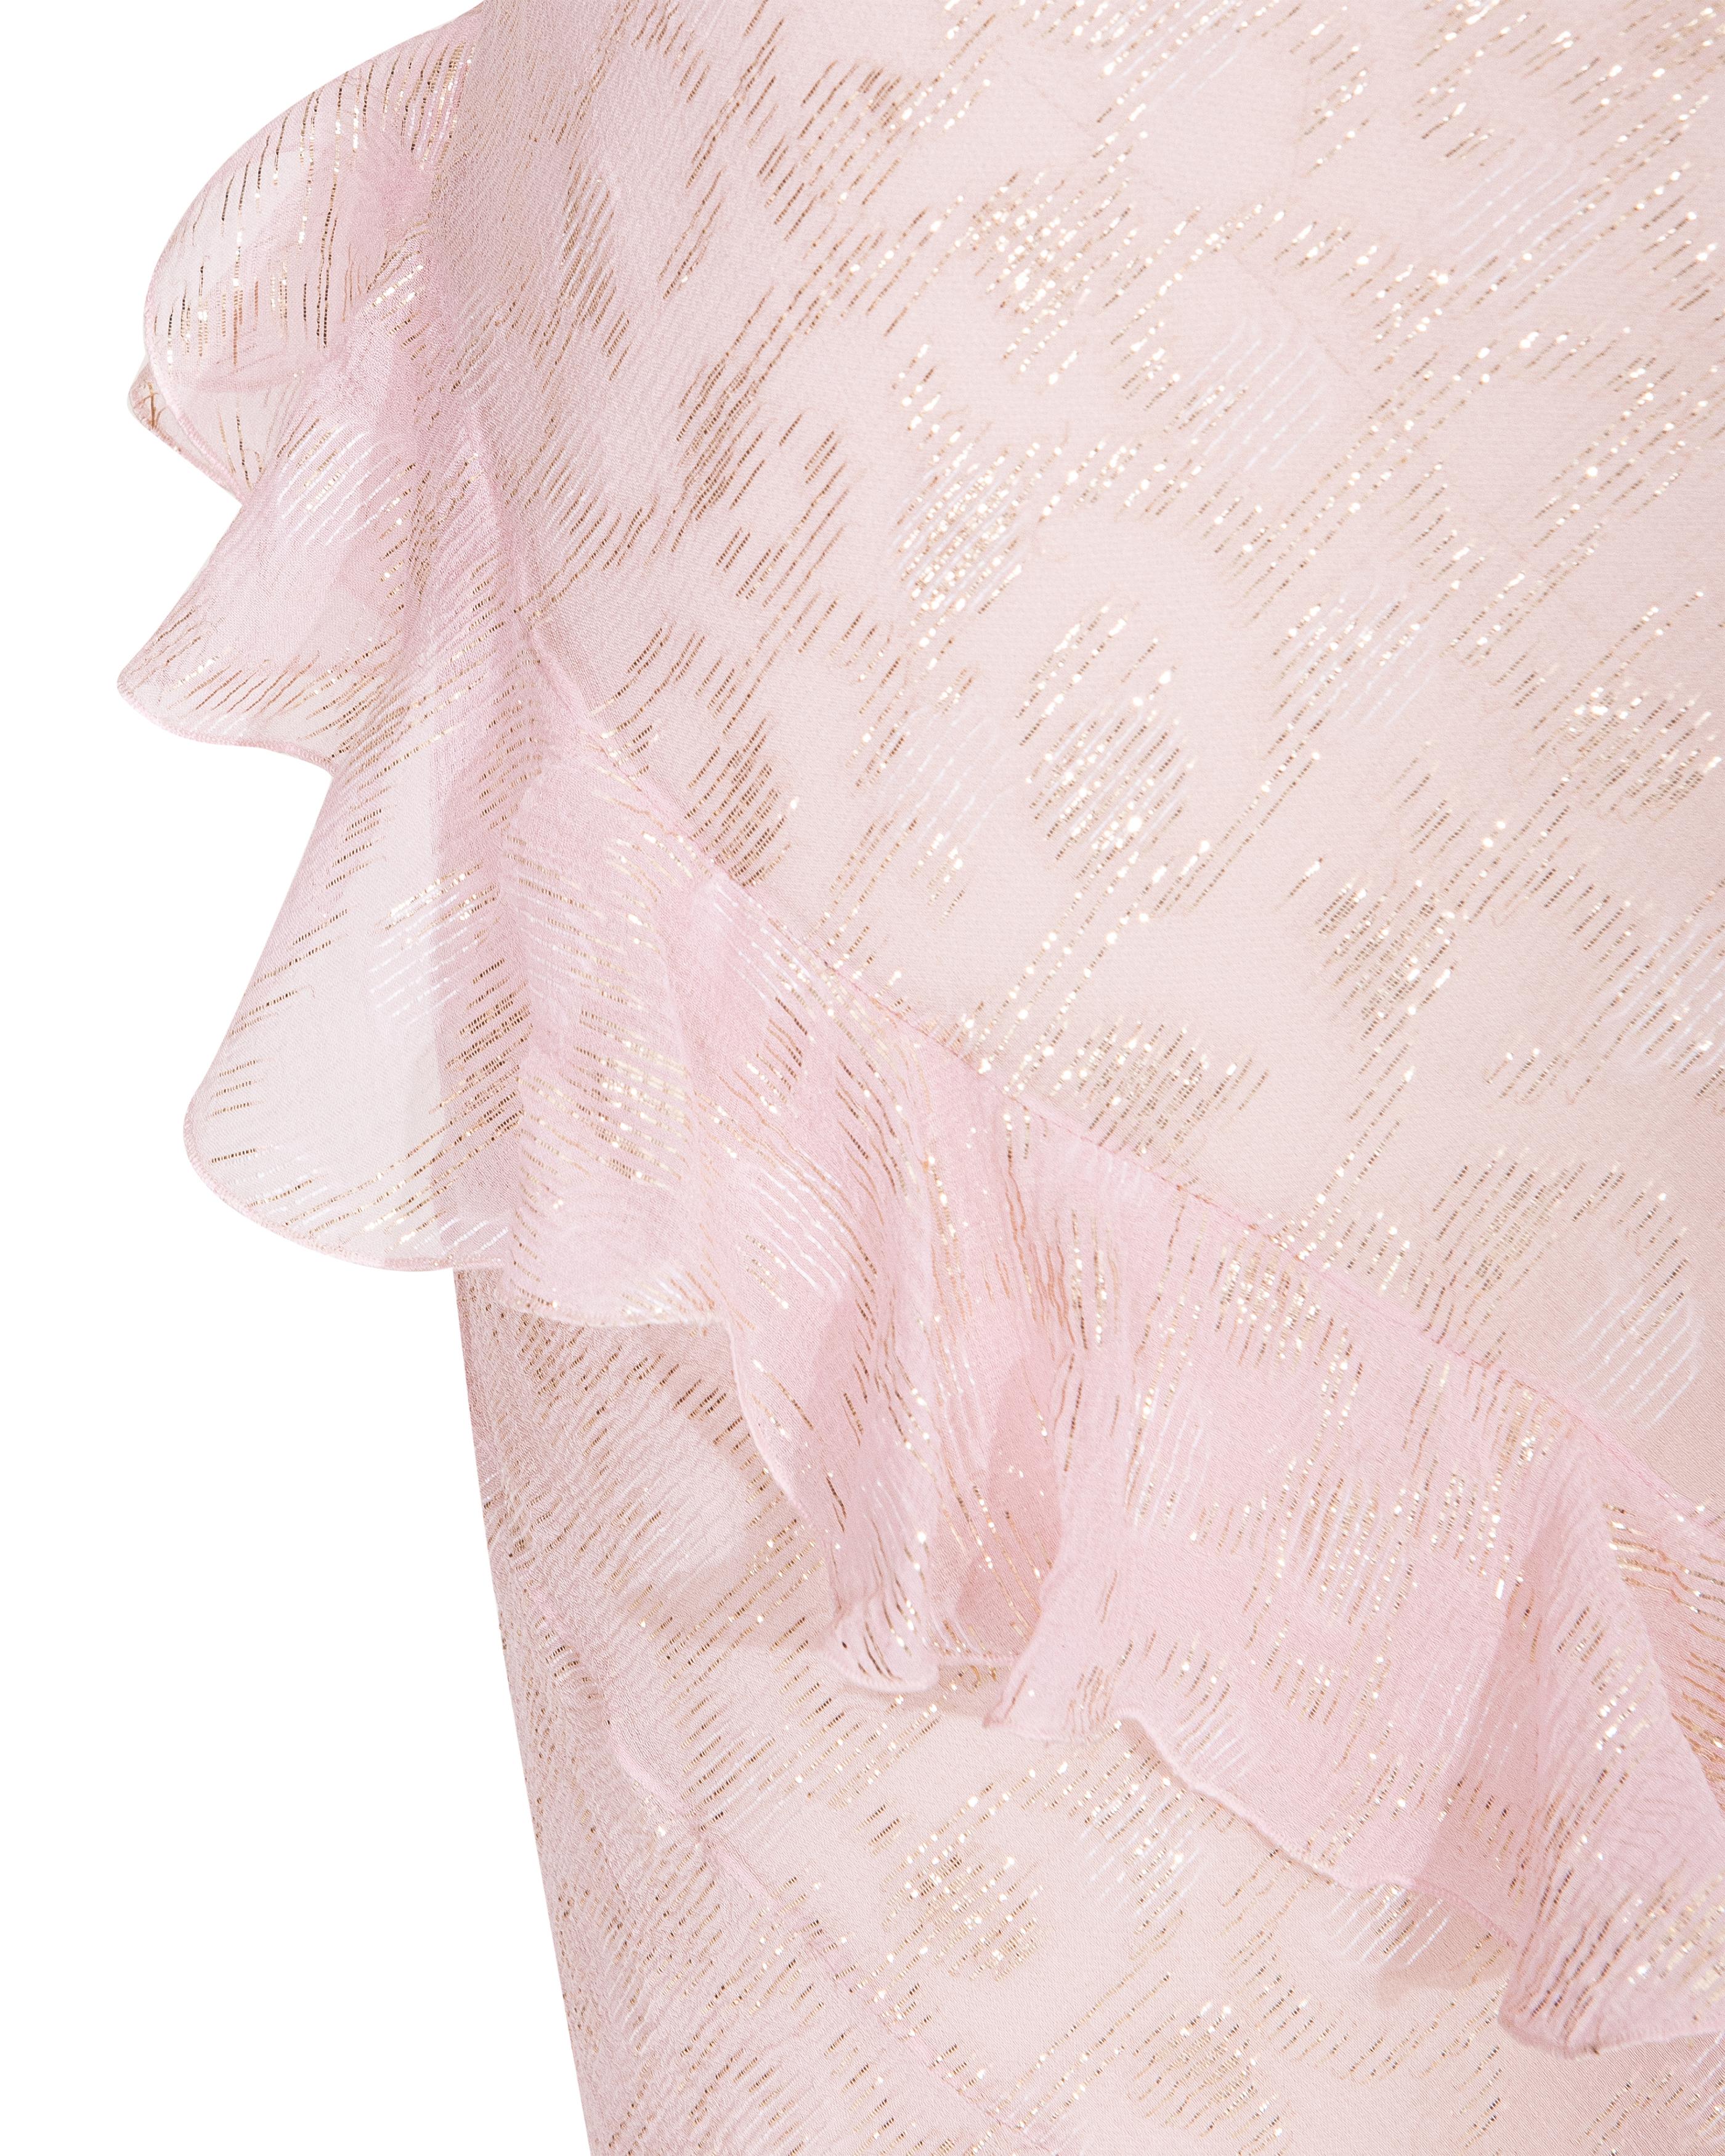 S/S 2004 Christian Dior by John Galliano Sheer Pink and Gold Ruffle Gown 3